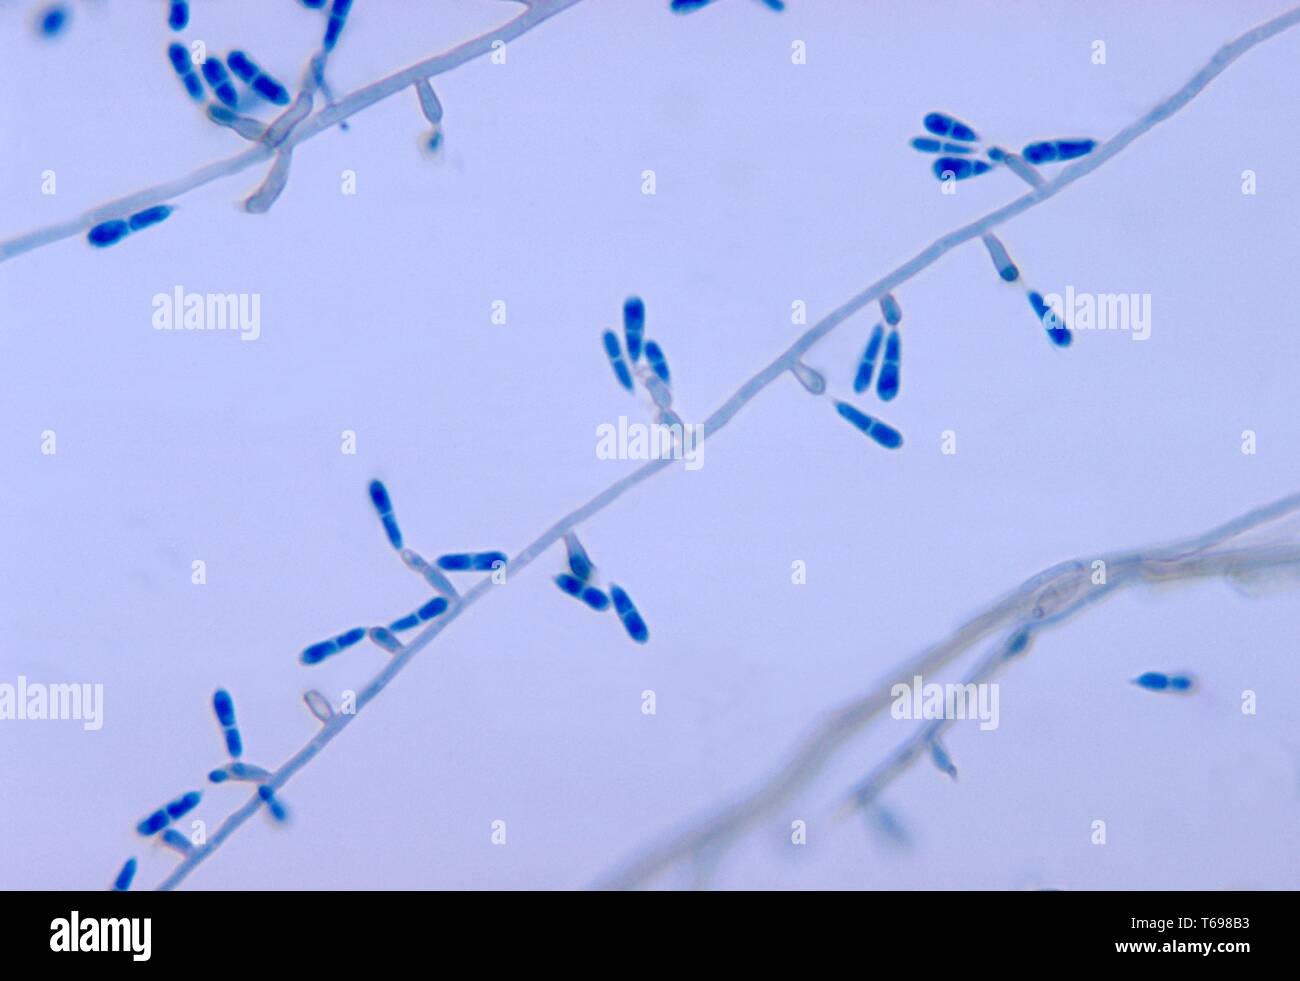 Photomicrograph of conidia on conidiophores of the fungus Ochroconis gallopavum (Dactylaria gallopava), isolated from turkey poult brain tissue specimens, 1971. Image courtesy Centers for Disease Control and Prevention (CDC) / Dr Lucille George. () Stock Photo